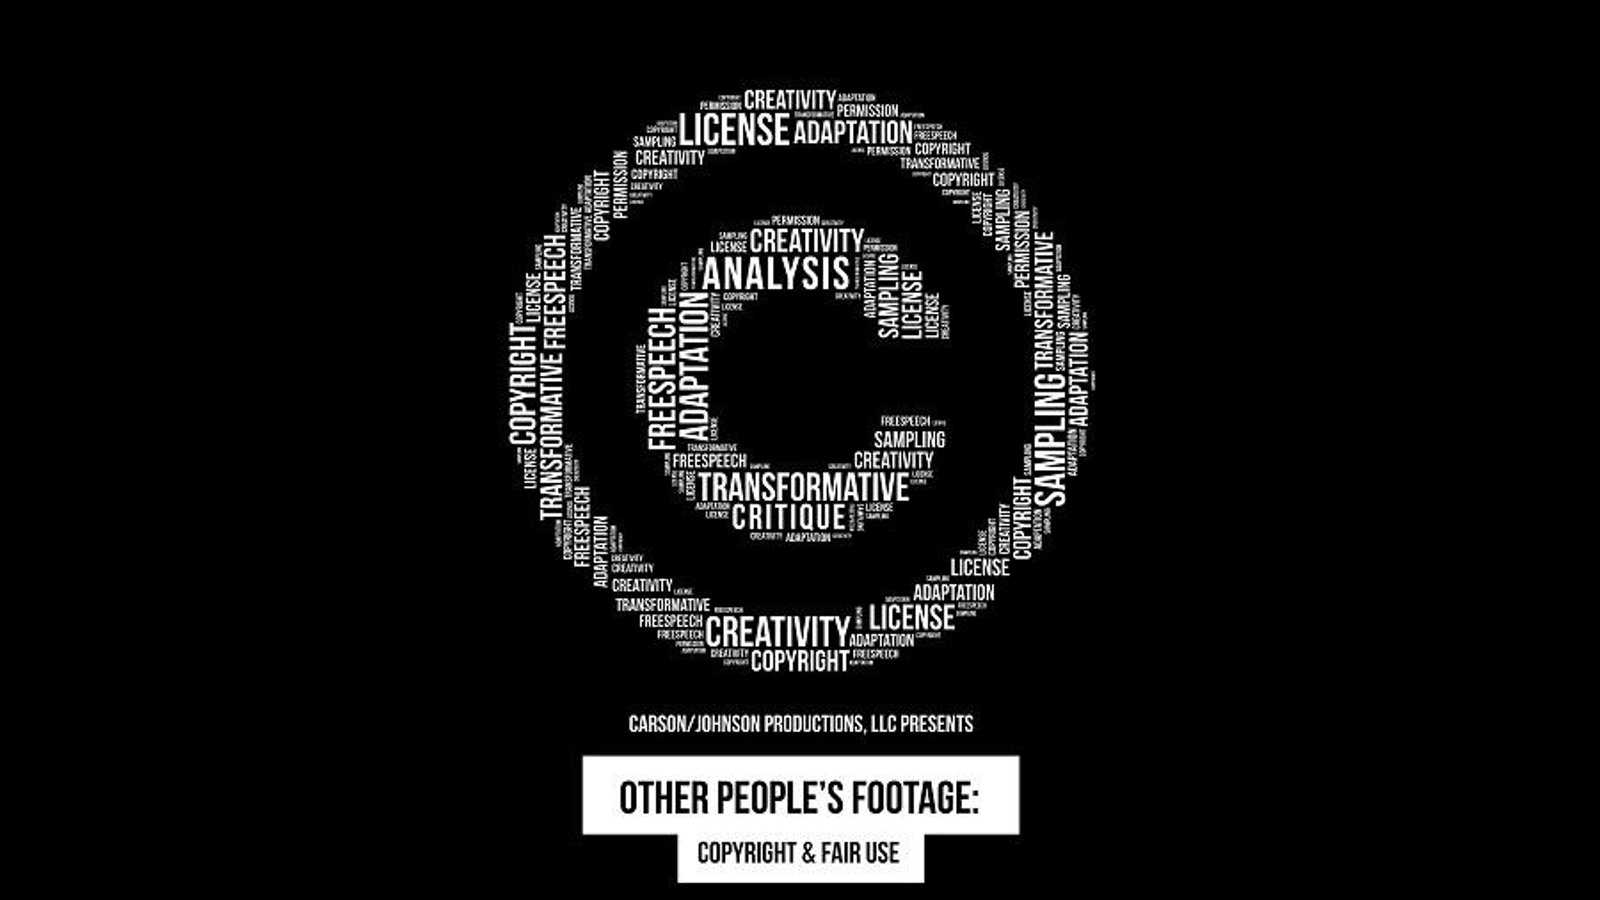 Other People's Footage - Copyright and Fair Use